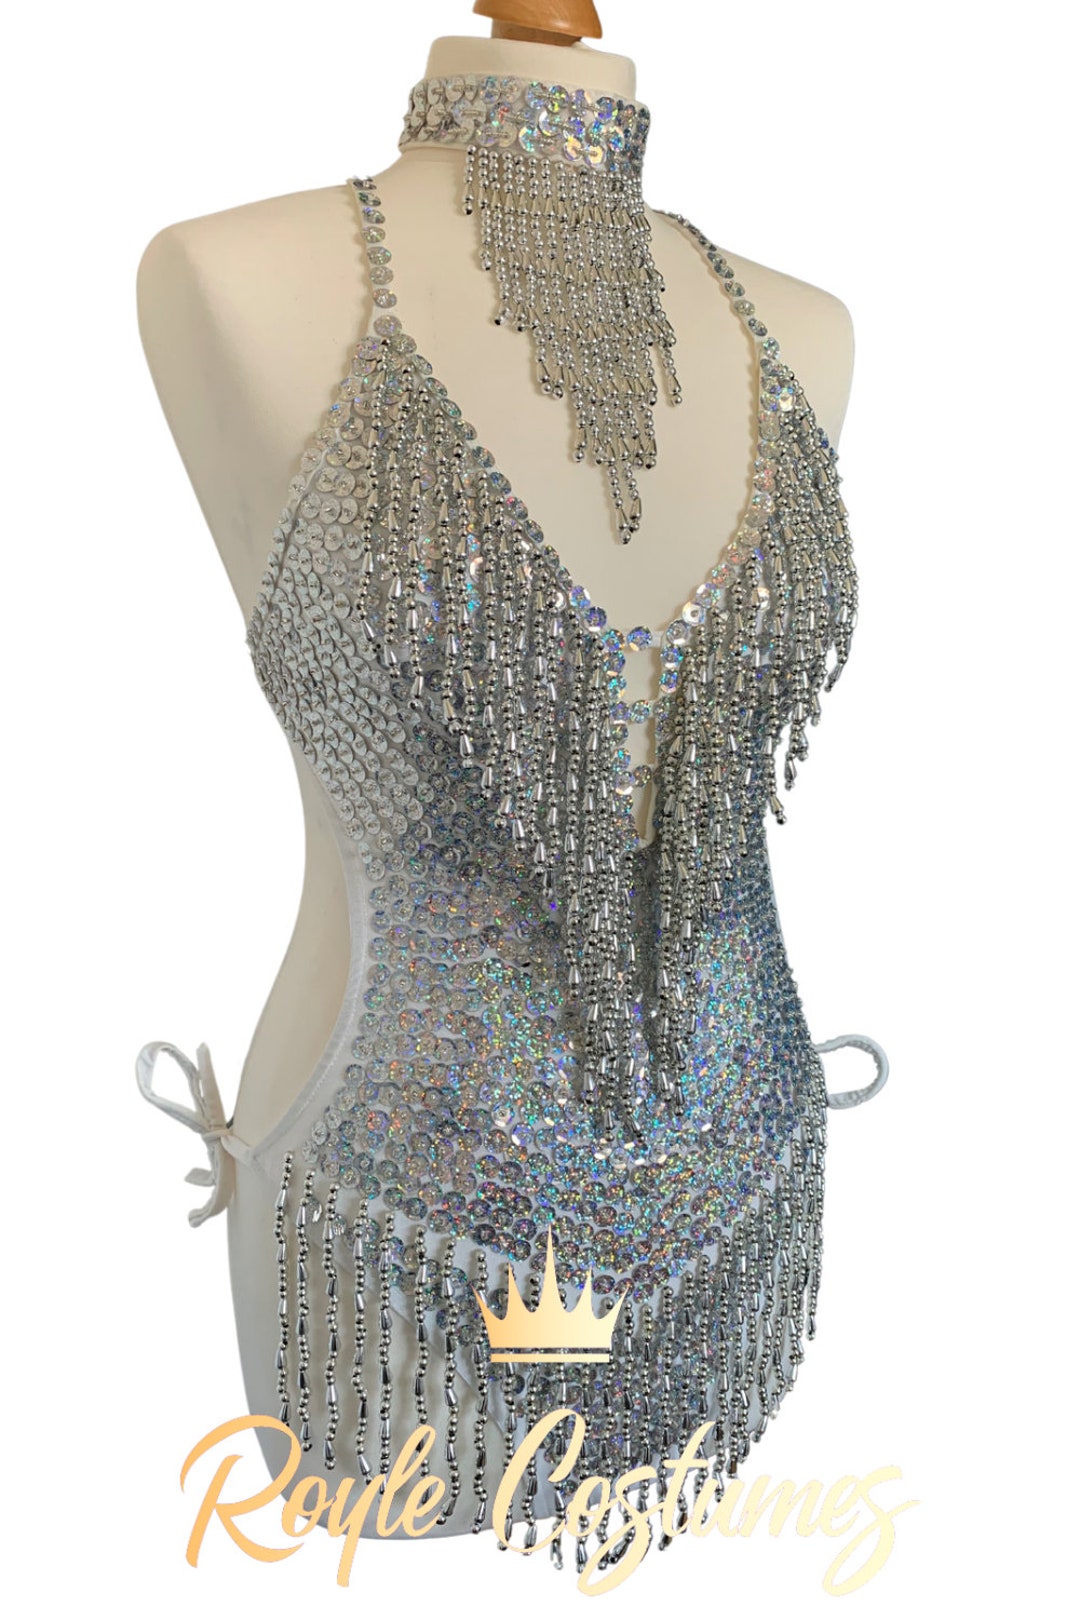 Showgirl Leotard in Holographic Silver for Circus Outfit, Silver